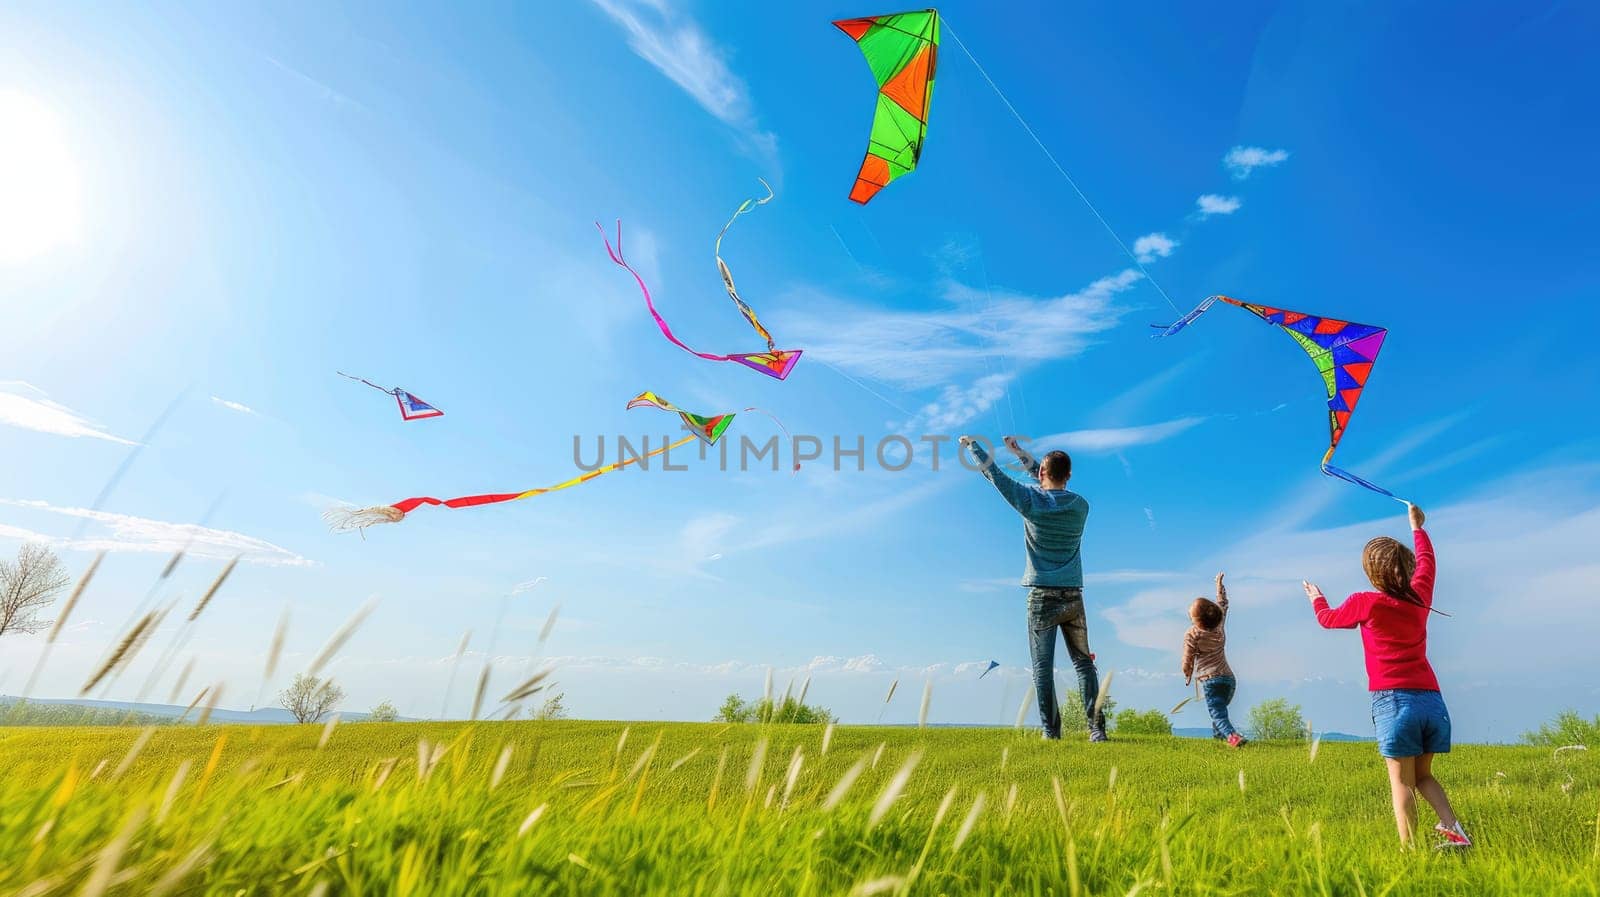 A happy family enjoys flying kites in the sky, surrounded by the natural landscape of a grassy field under the clouds. AIG41